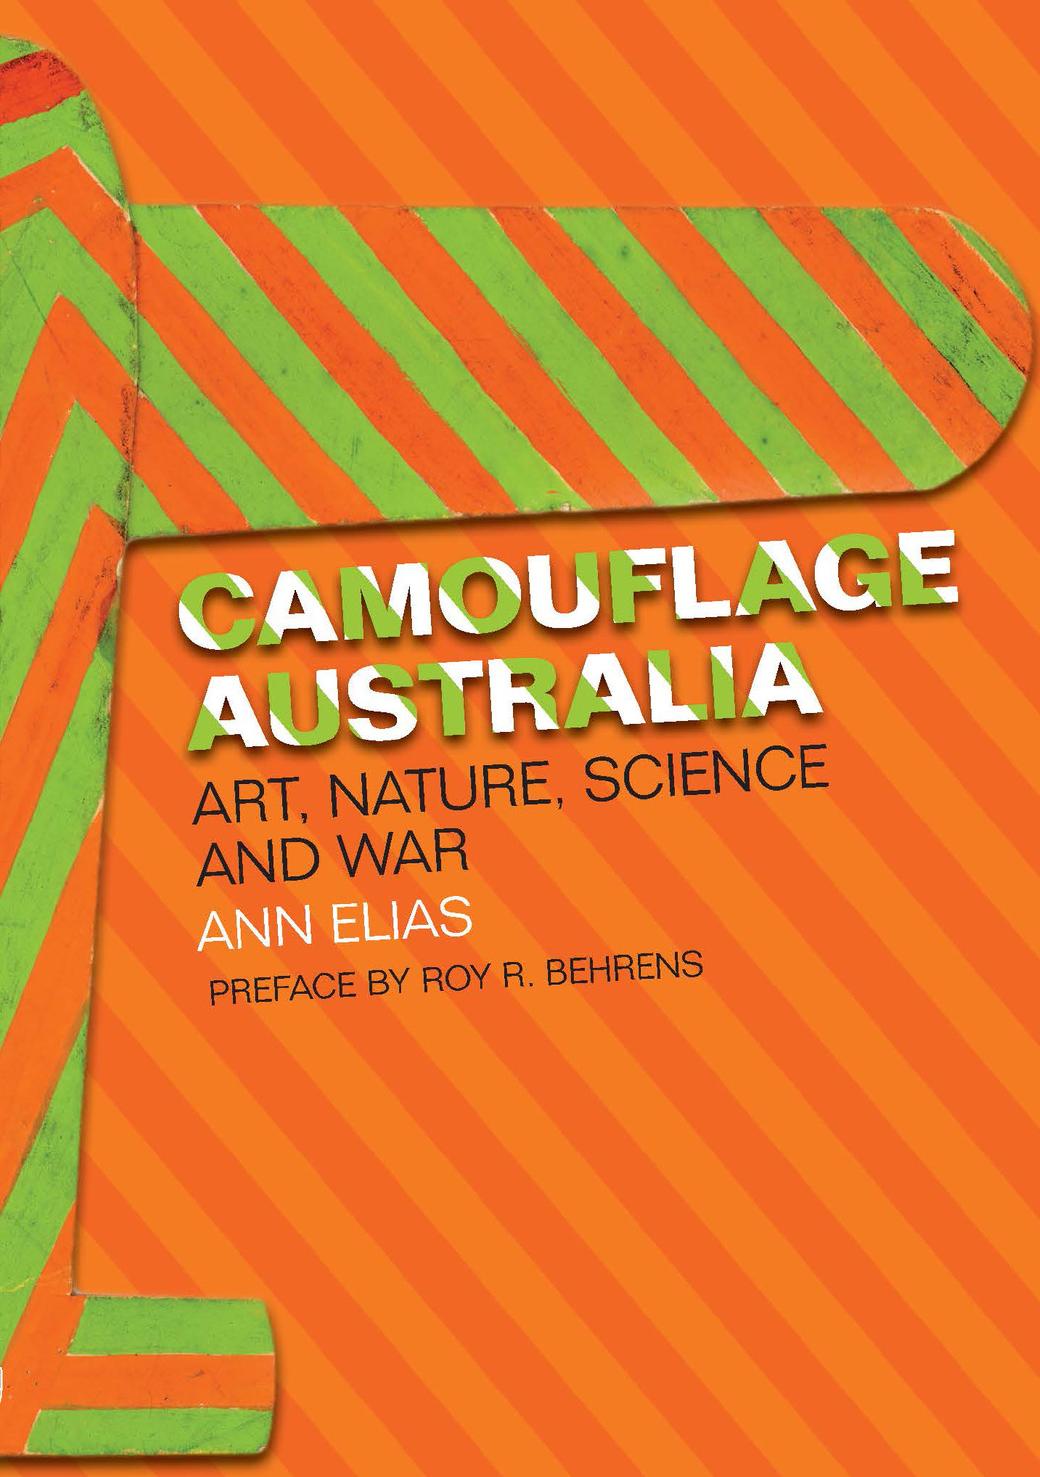 Camouflage Australia: Art, Nature, Science and War by Ann Elias